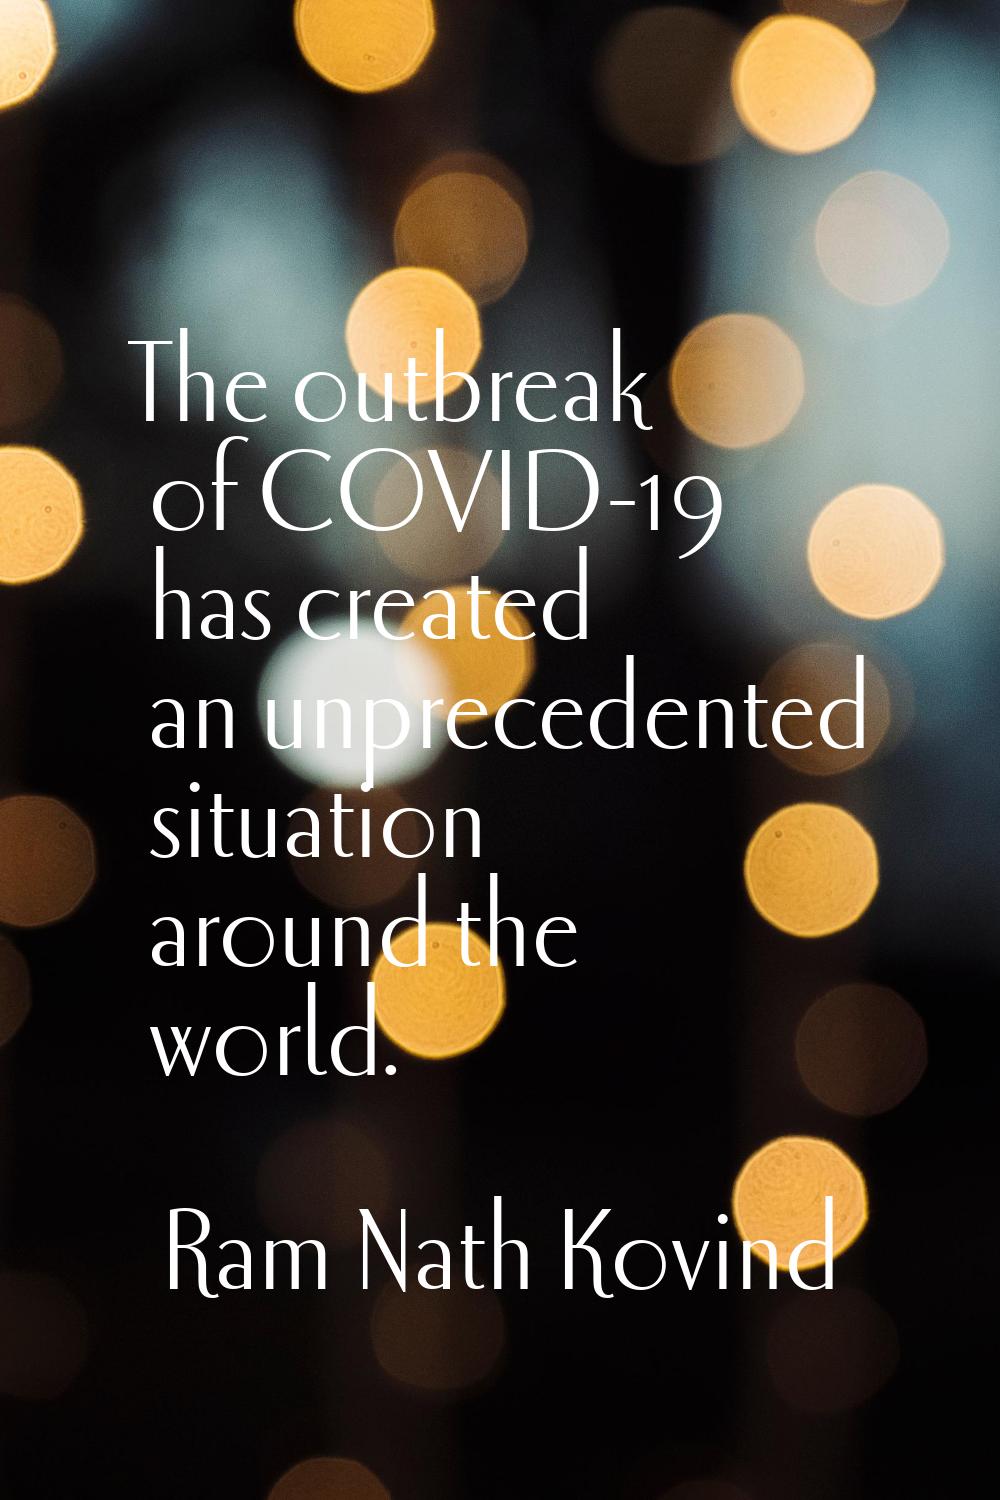 The outbreak of COVID-19 has created an unprecedented situation around the world.